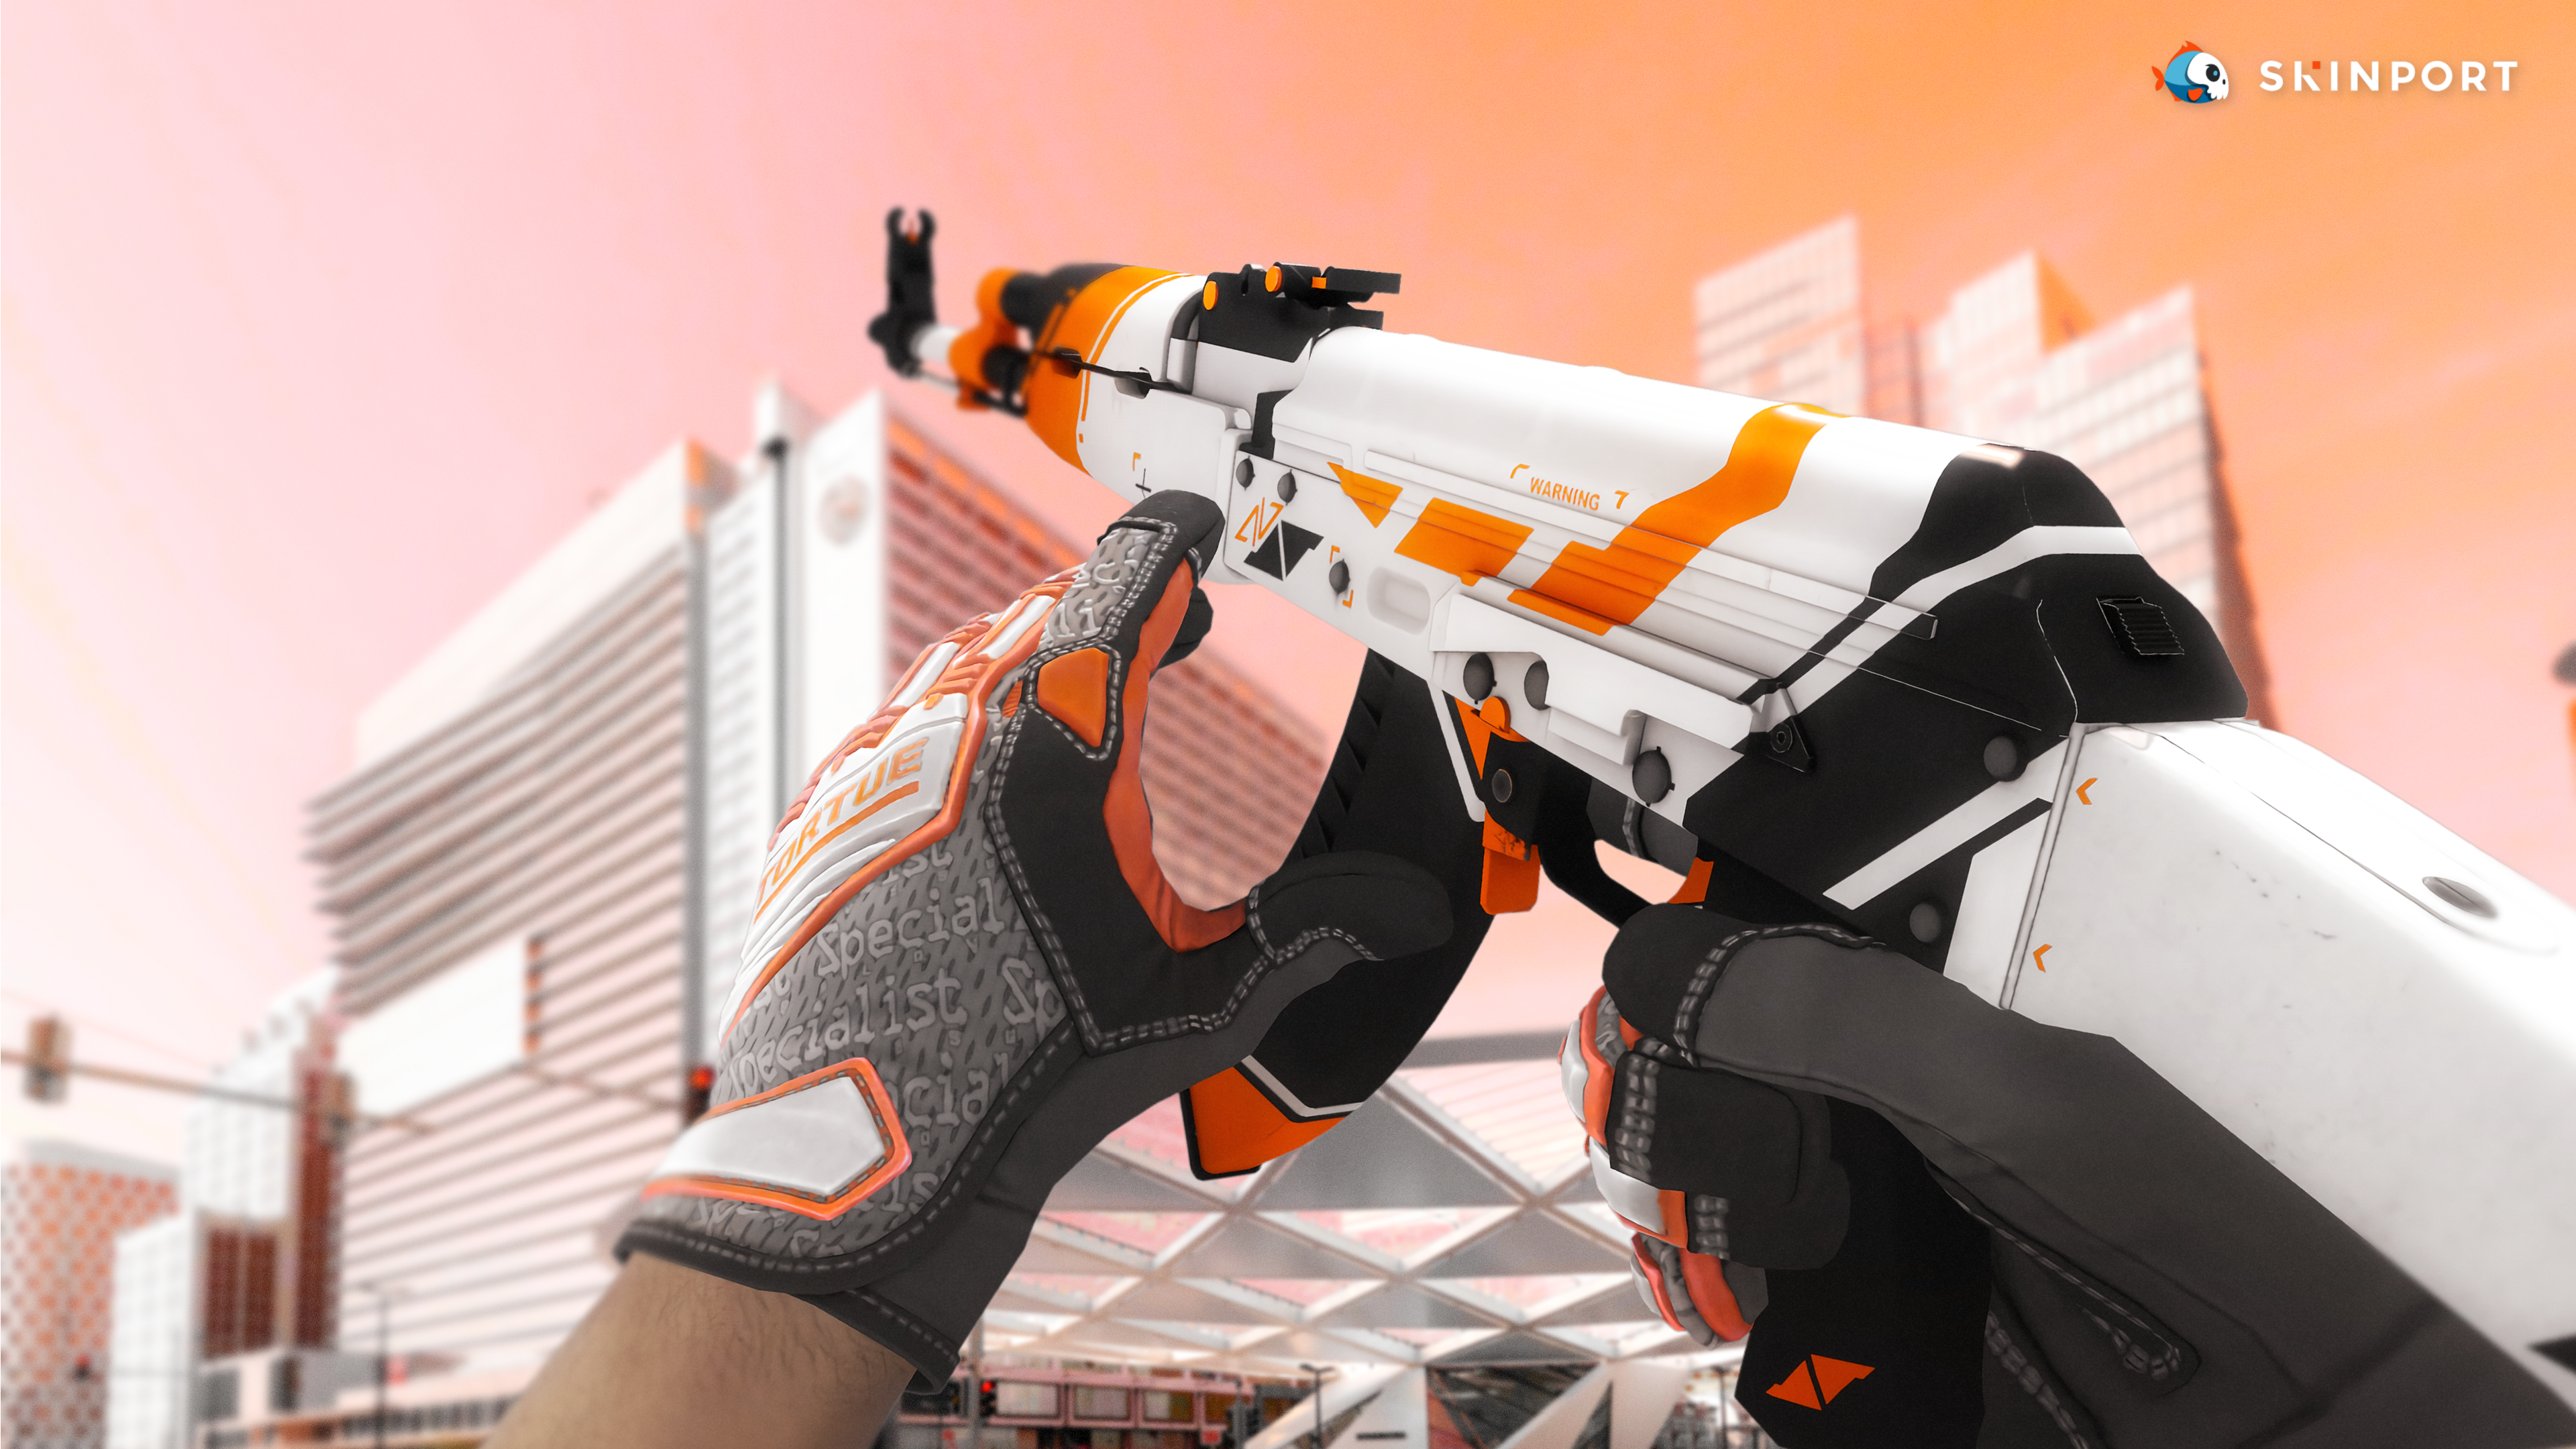 🔥 #awp asiimov - android HD Photos & Wallpapers (75+ Images) - Page: 3